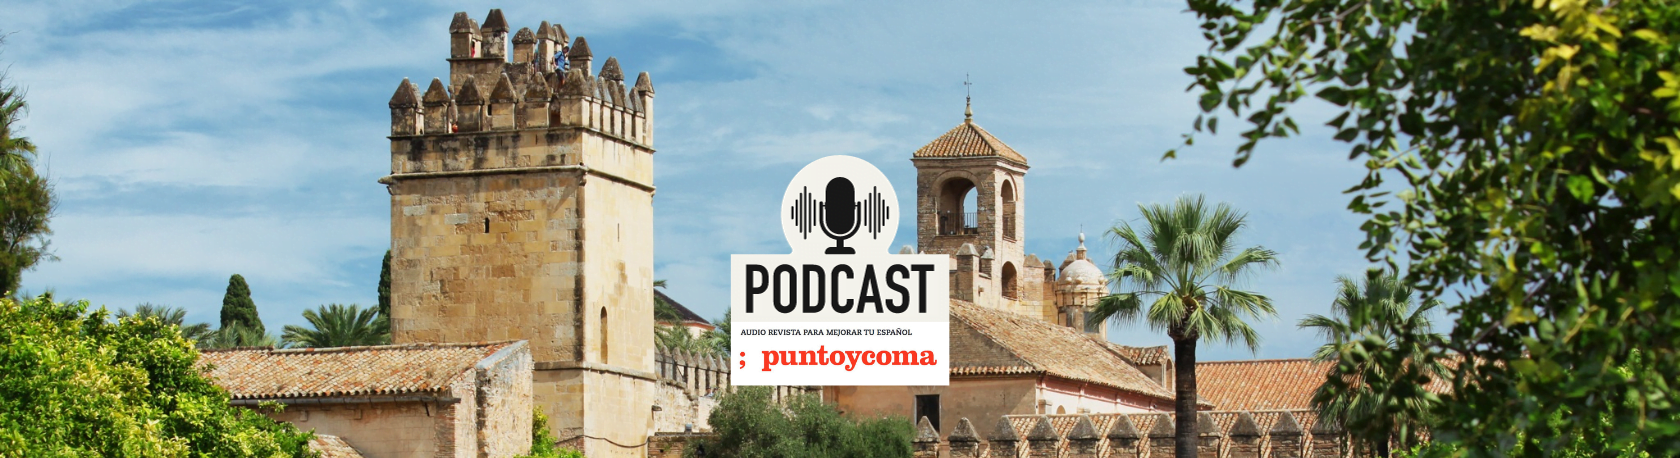 Develop your Spanish listening skills: Cordoba and its cultural melting pot heritage